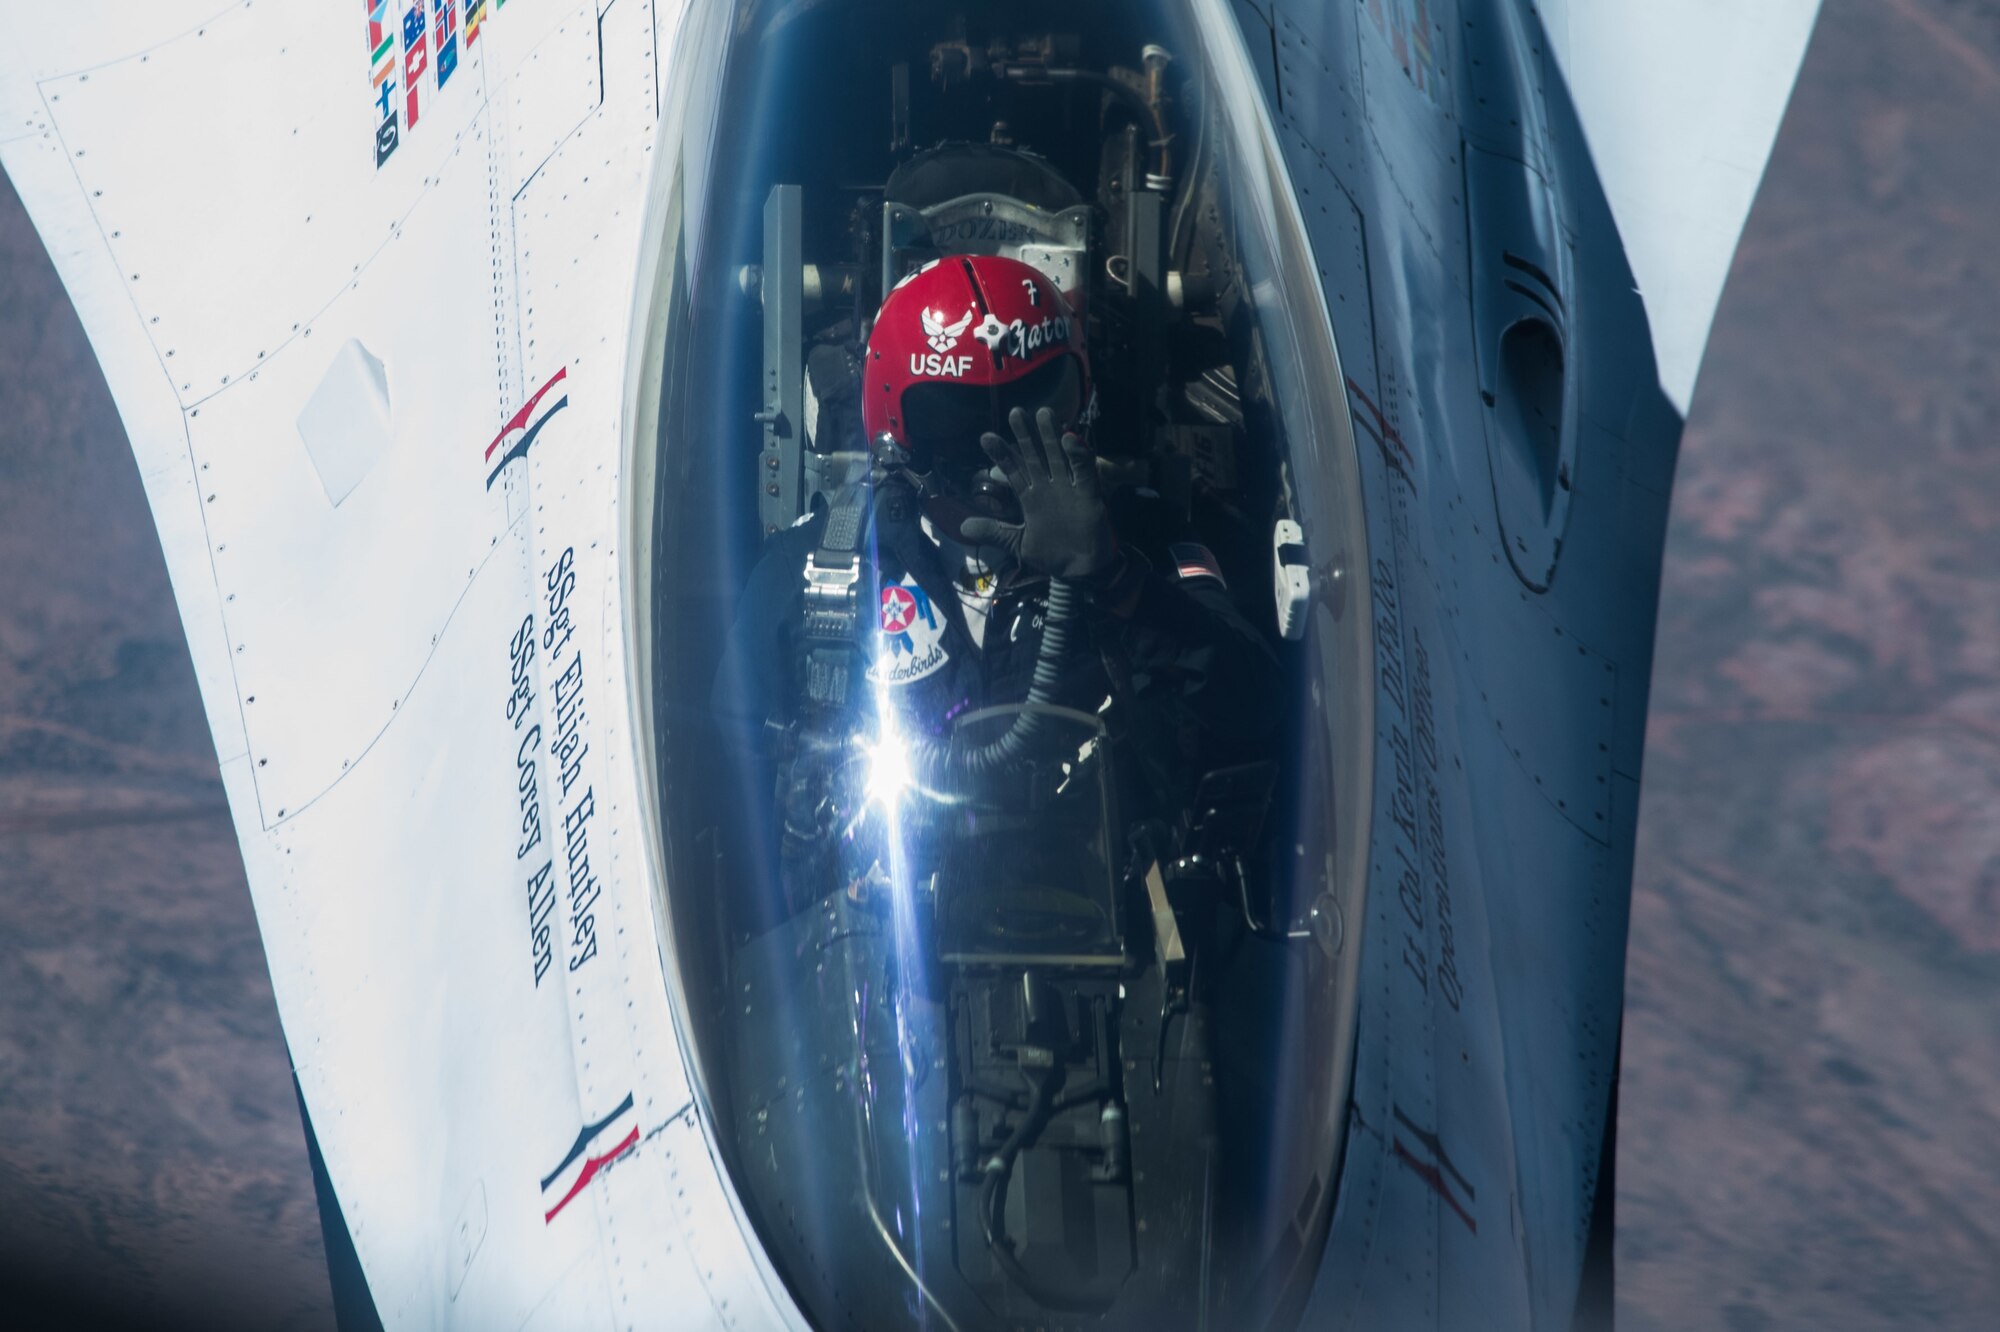 A pilot of an F-16 Fighting Falcon Thunderbird waves to Tech. Sgt. Bobby Jones, 350th Air Refueling Squadron in-flight refueling specialist, after receiving fuel from a KC-135 Stratotanker Oct. 15, 2020 through the skies of New Mexico. The Thunderbirds, the Air Force’s premier aerial demonstration team, were en route to the Bell Fort Worth Alliance Air Show in Fort Worth, Texas. (U.S. Air Force photo by Senior Airman Alexi Bosarge)